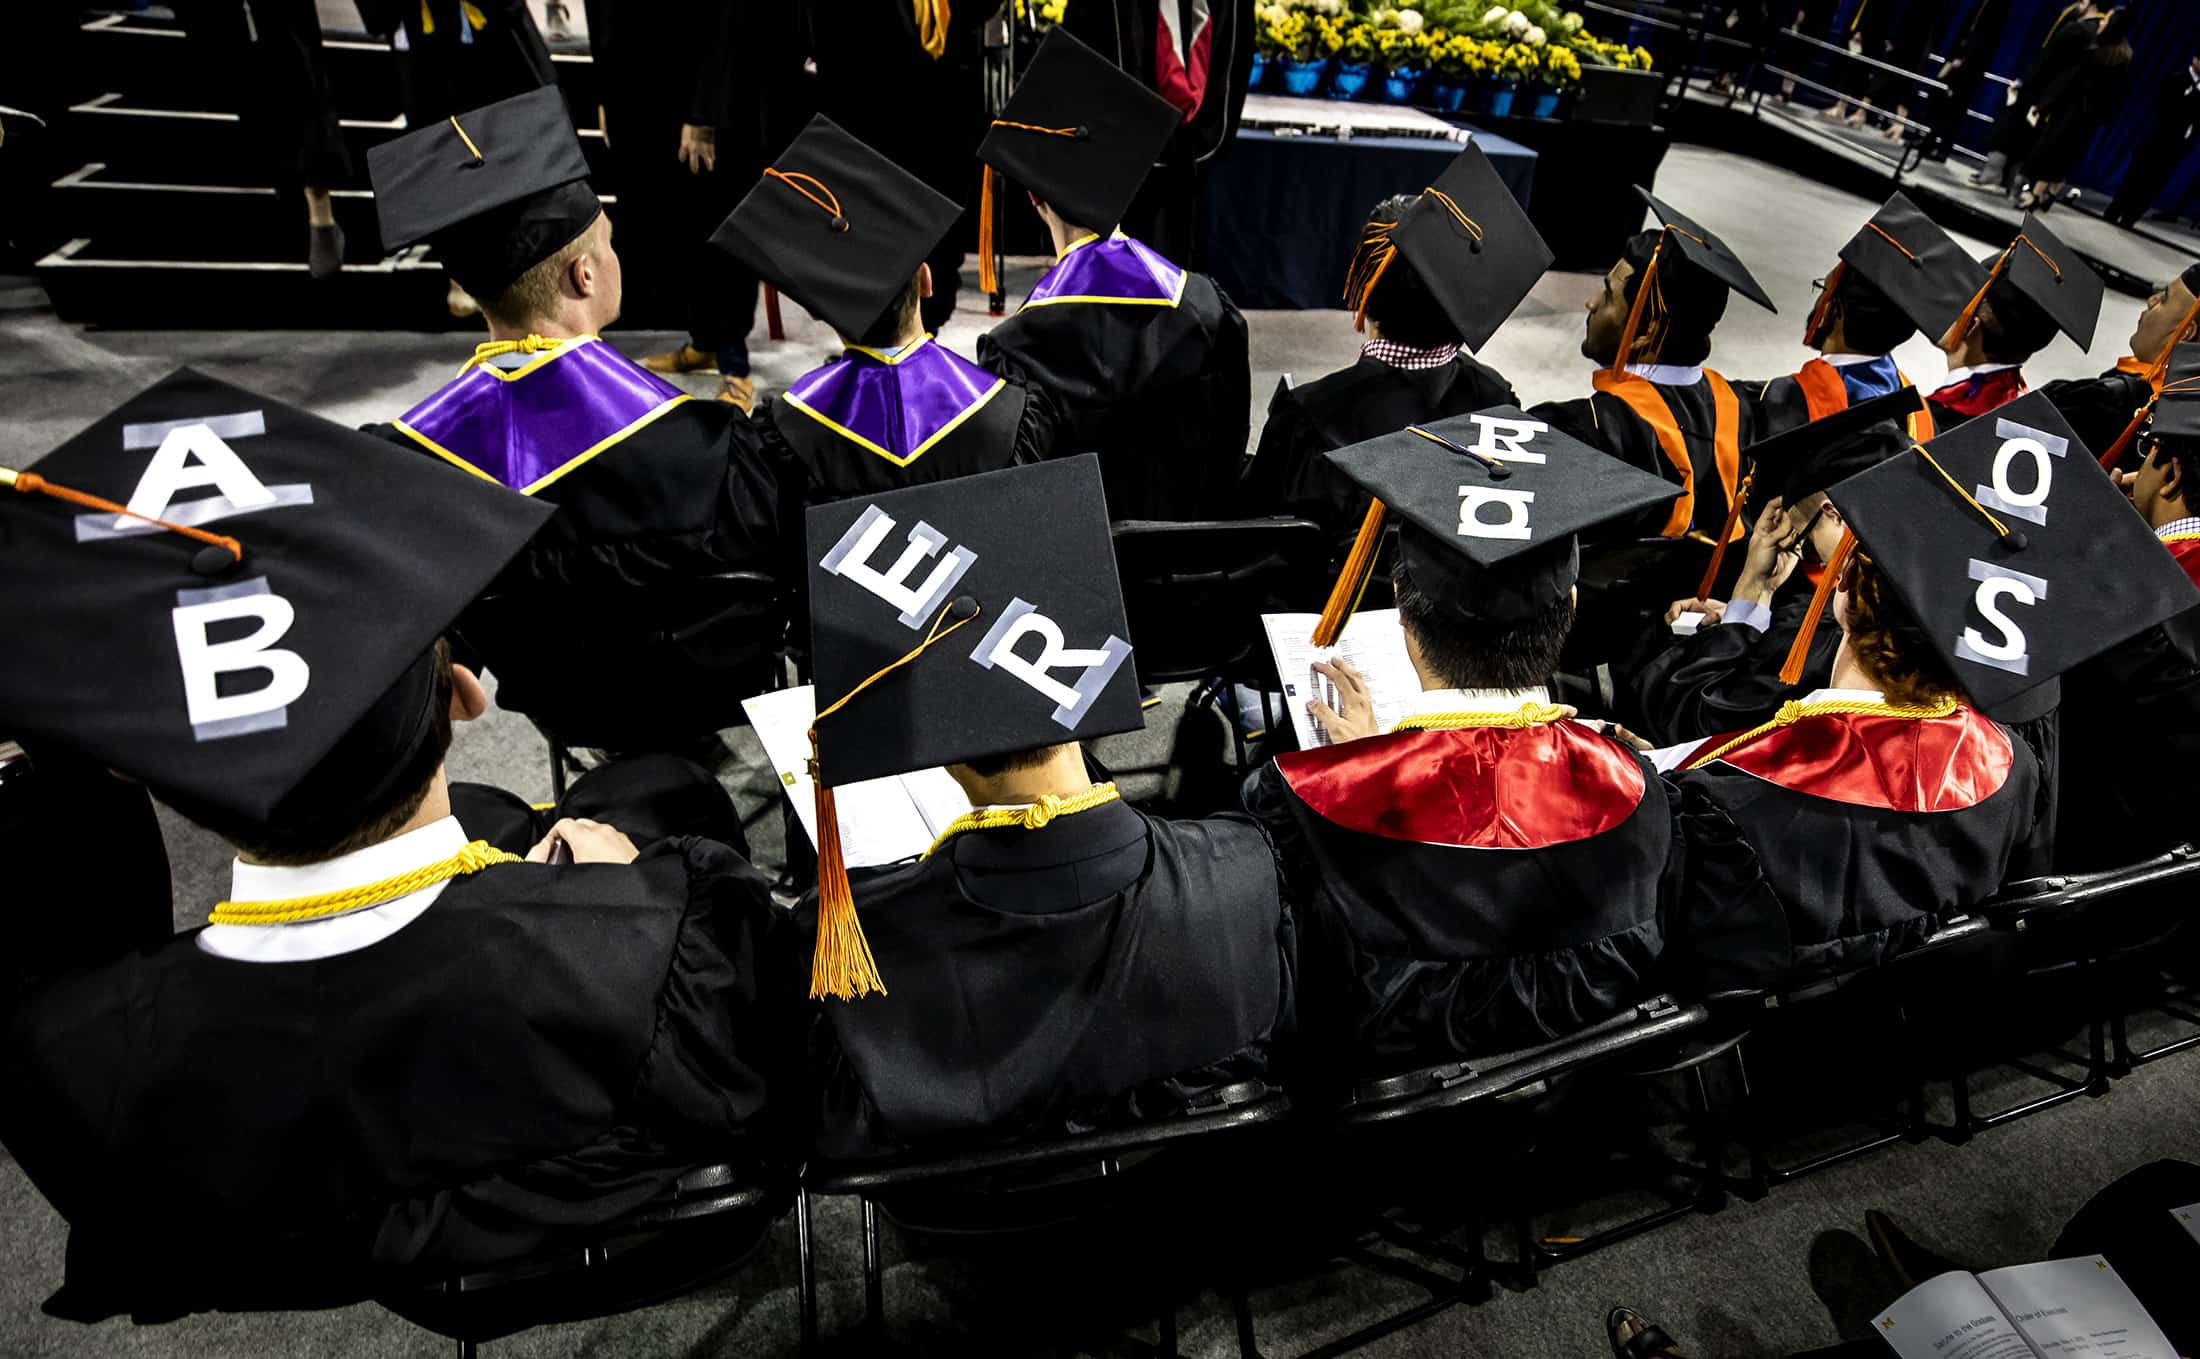 A group of graduating AERO students at commencement with their graduate caps